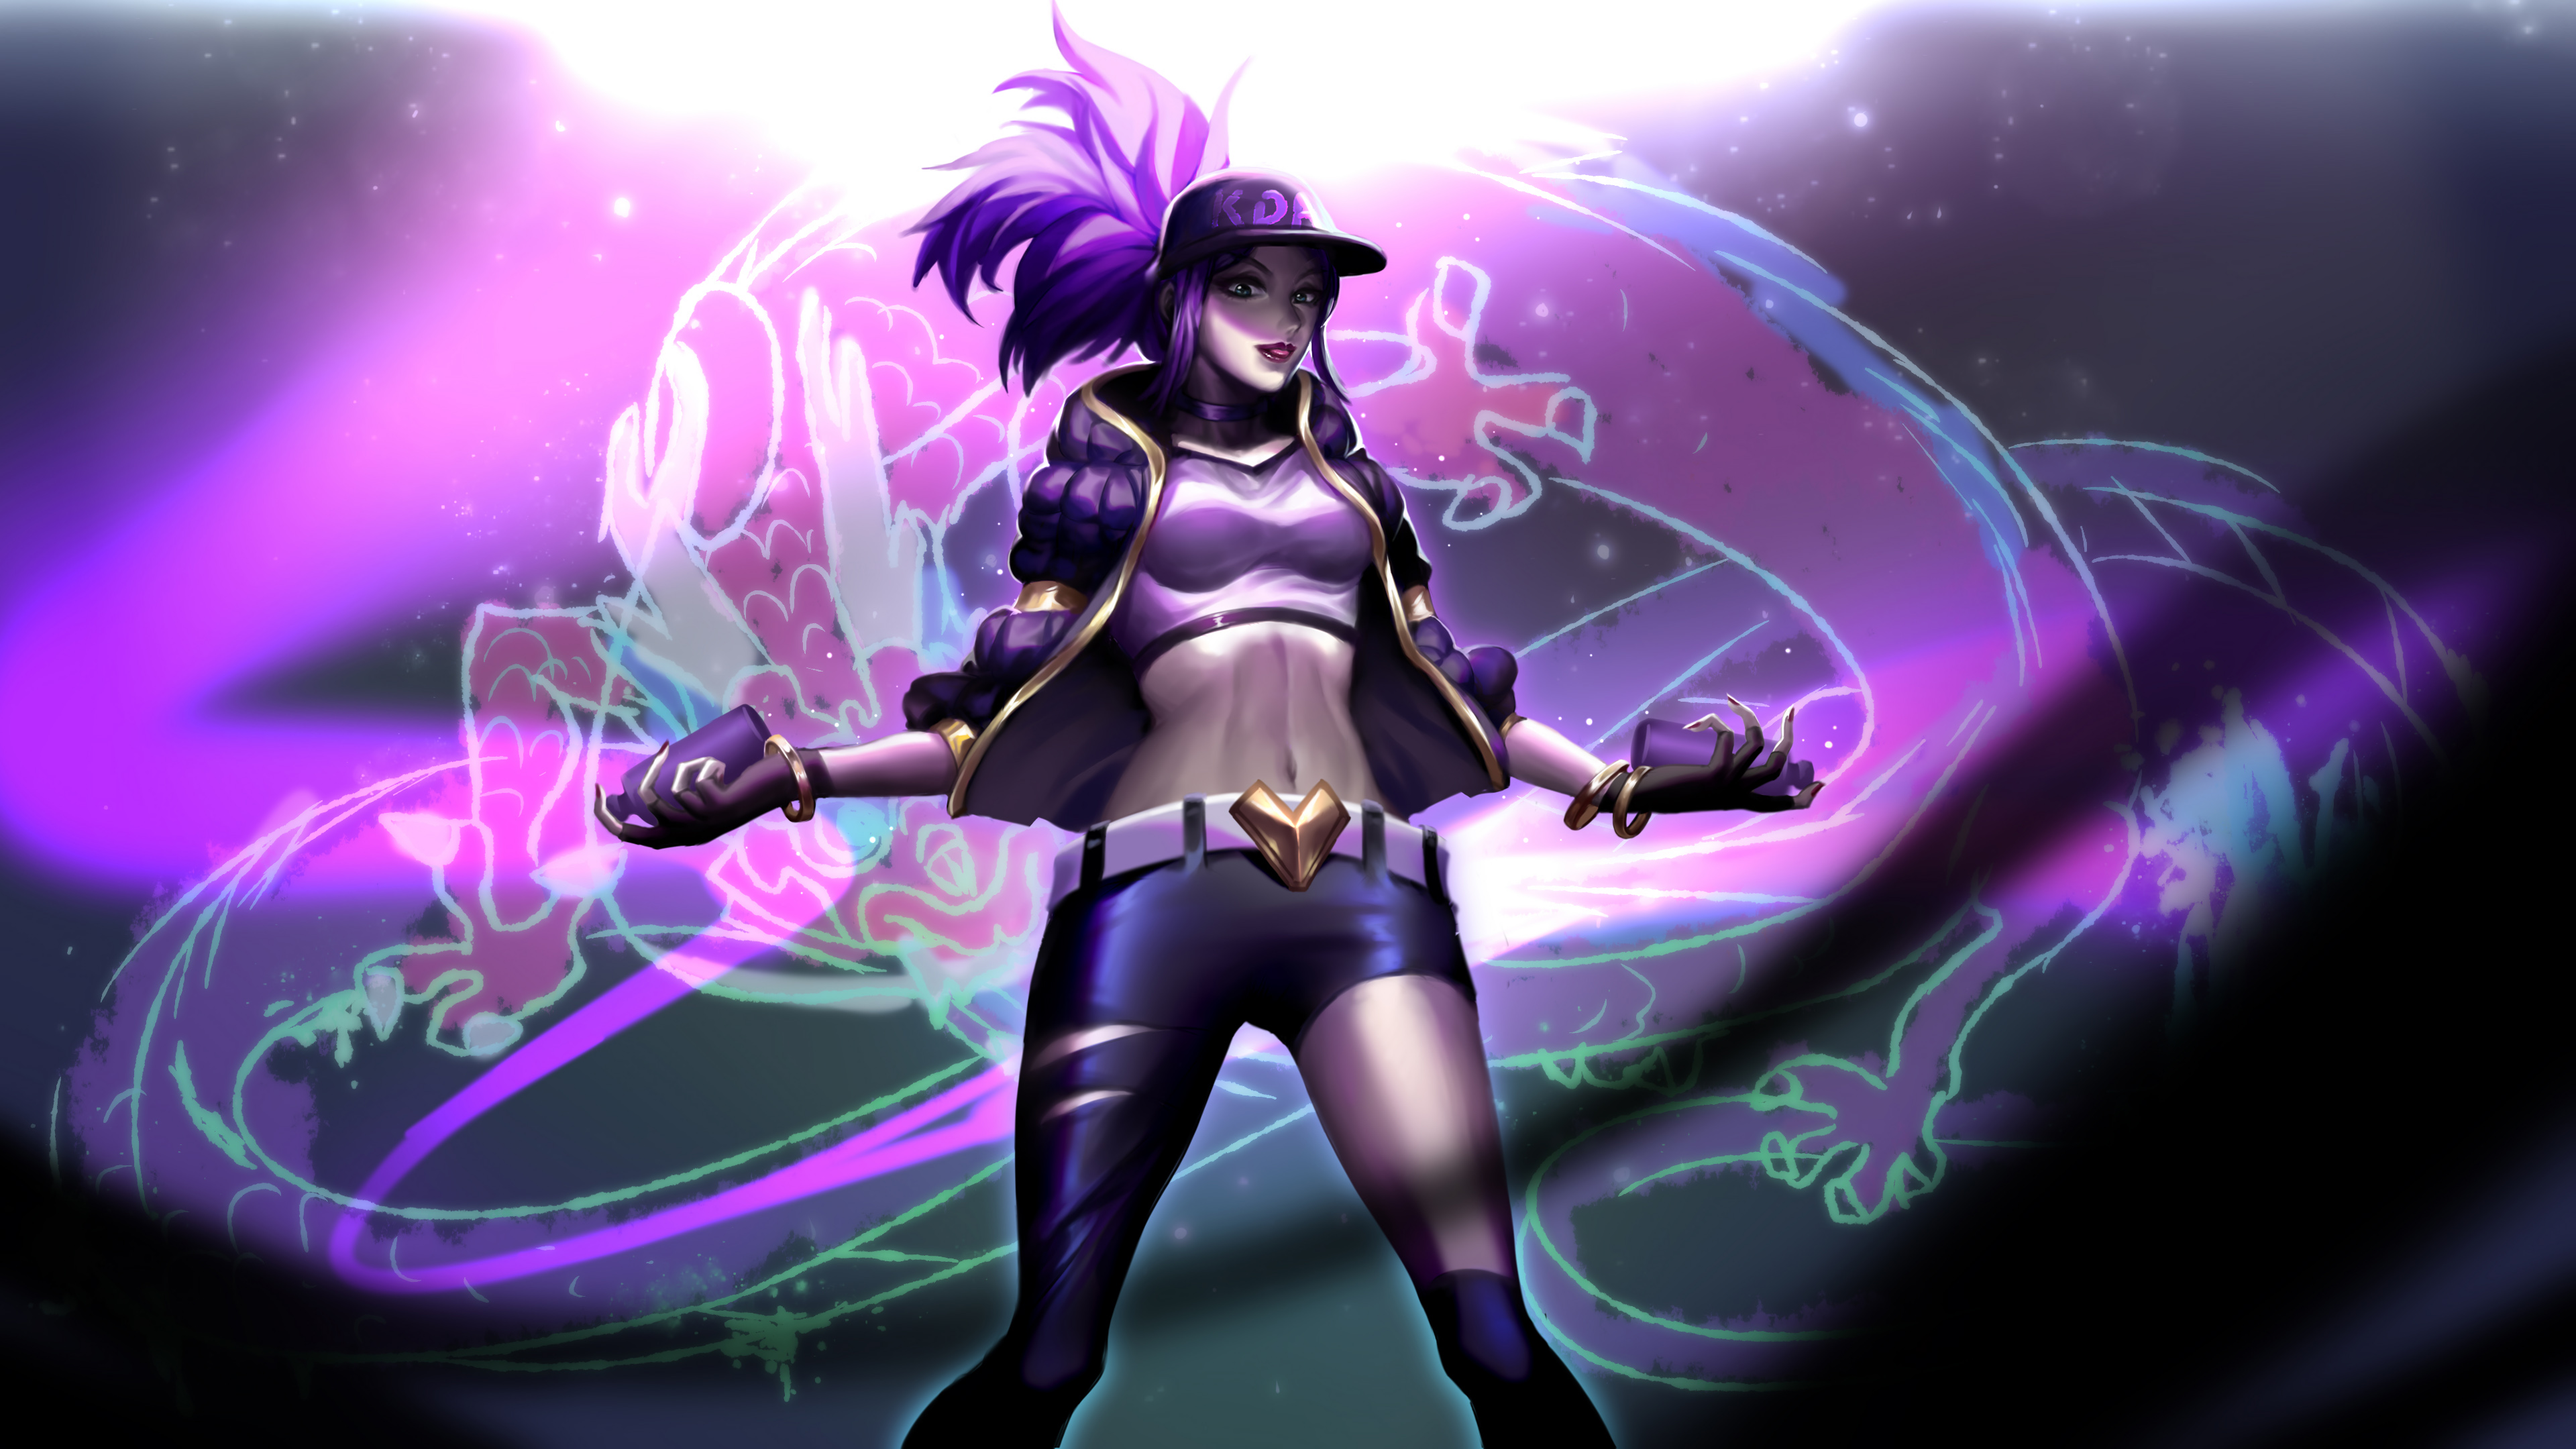 Kda akali hd games k wallpapers images backgrounds photos and pictures